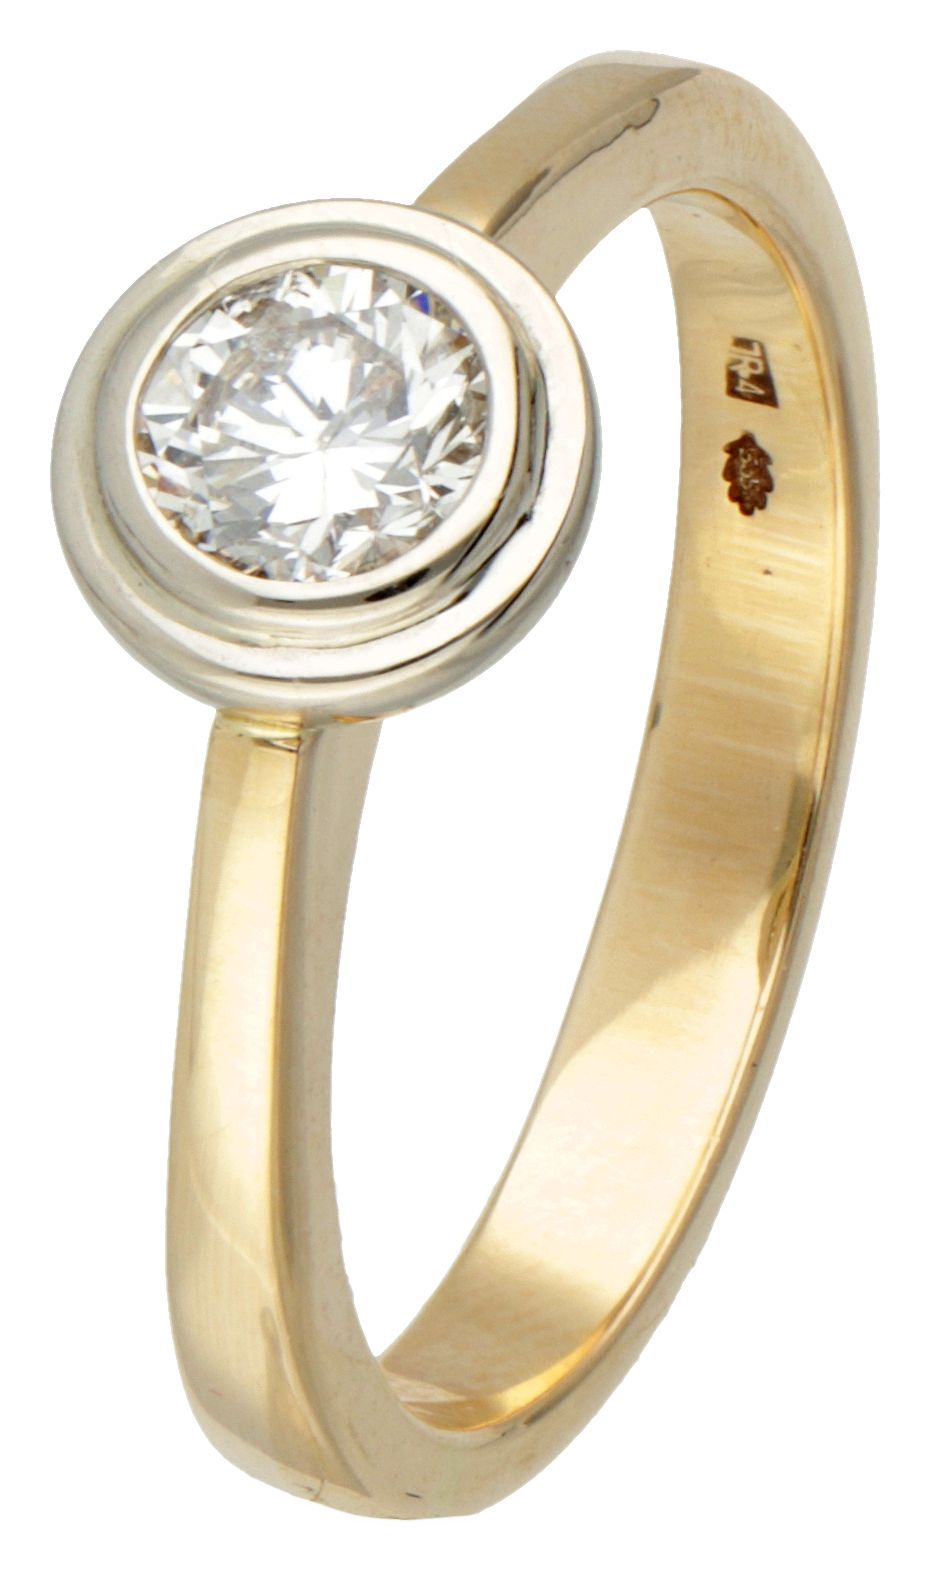 14K. Yellow gold solitaire ring set with approx. 0.40 ct. Diamond. 印记：橡树叶中的585。制&hellip;